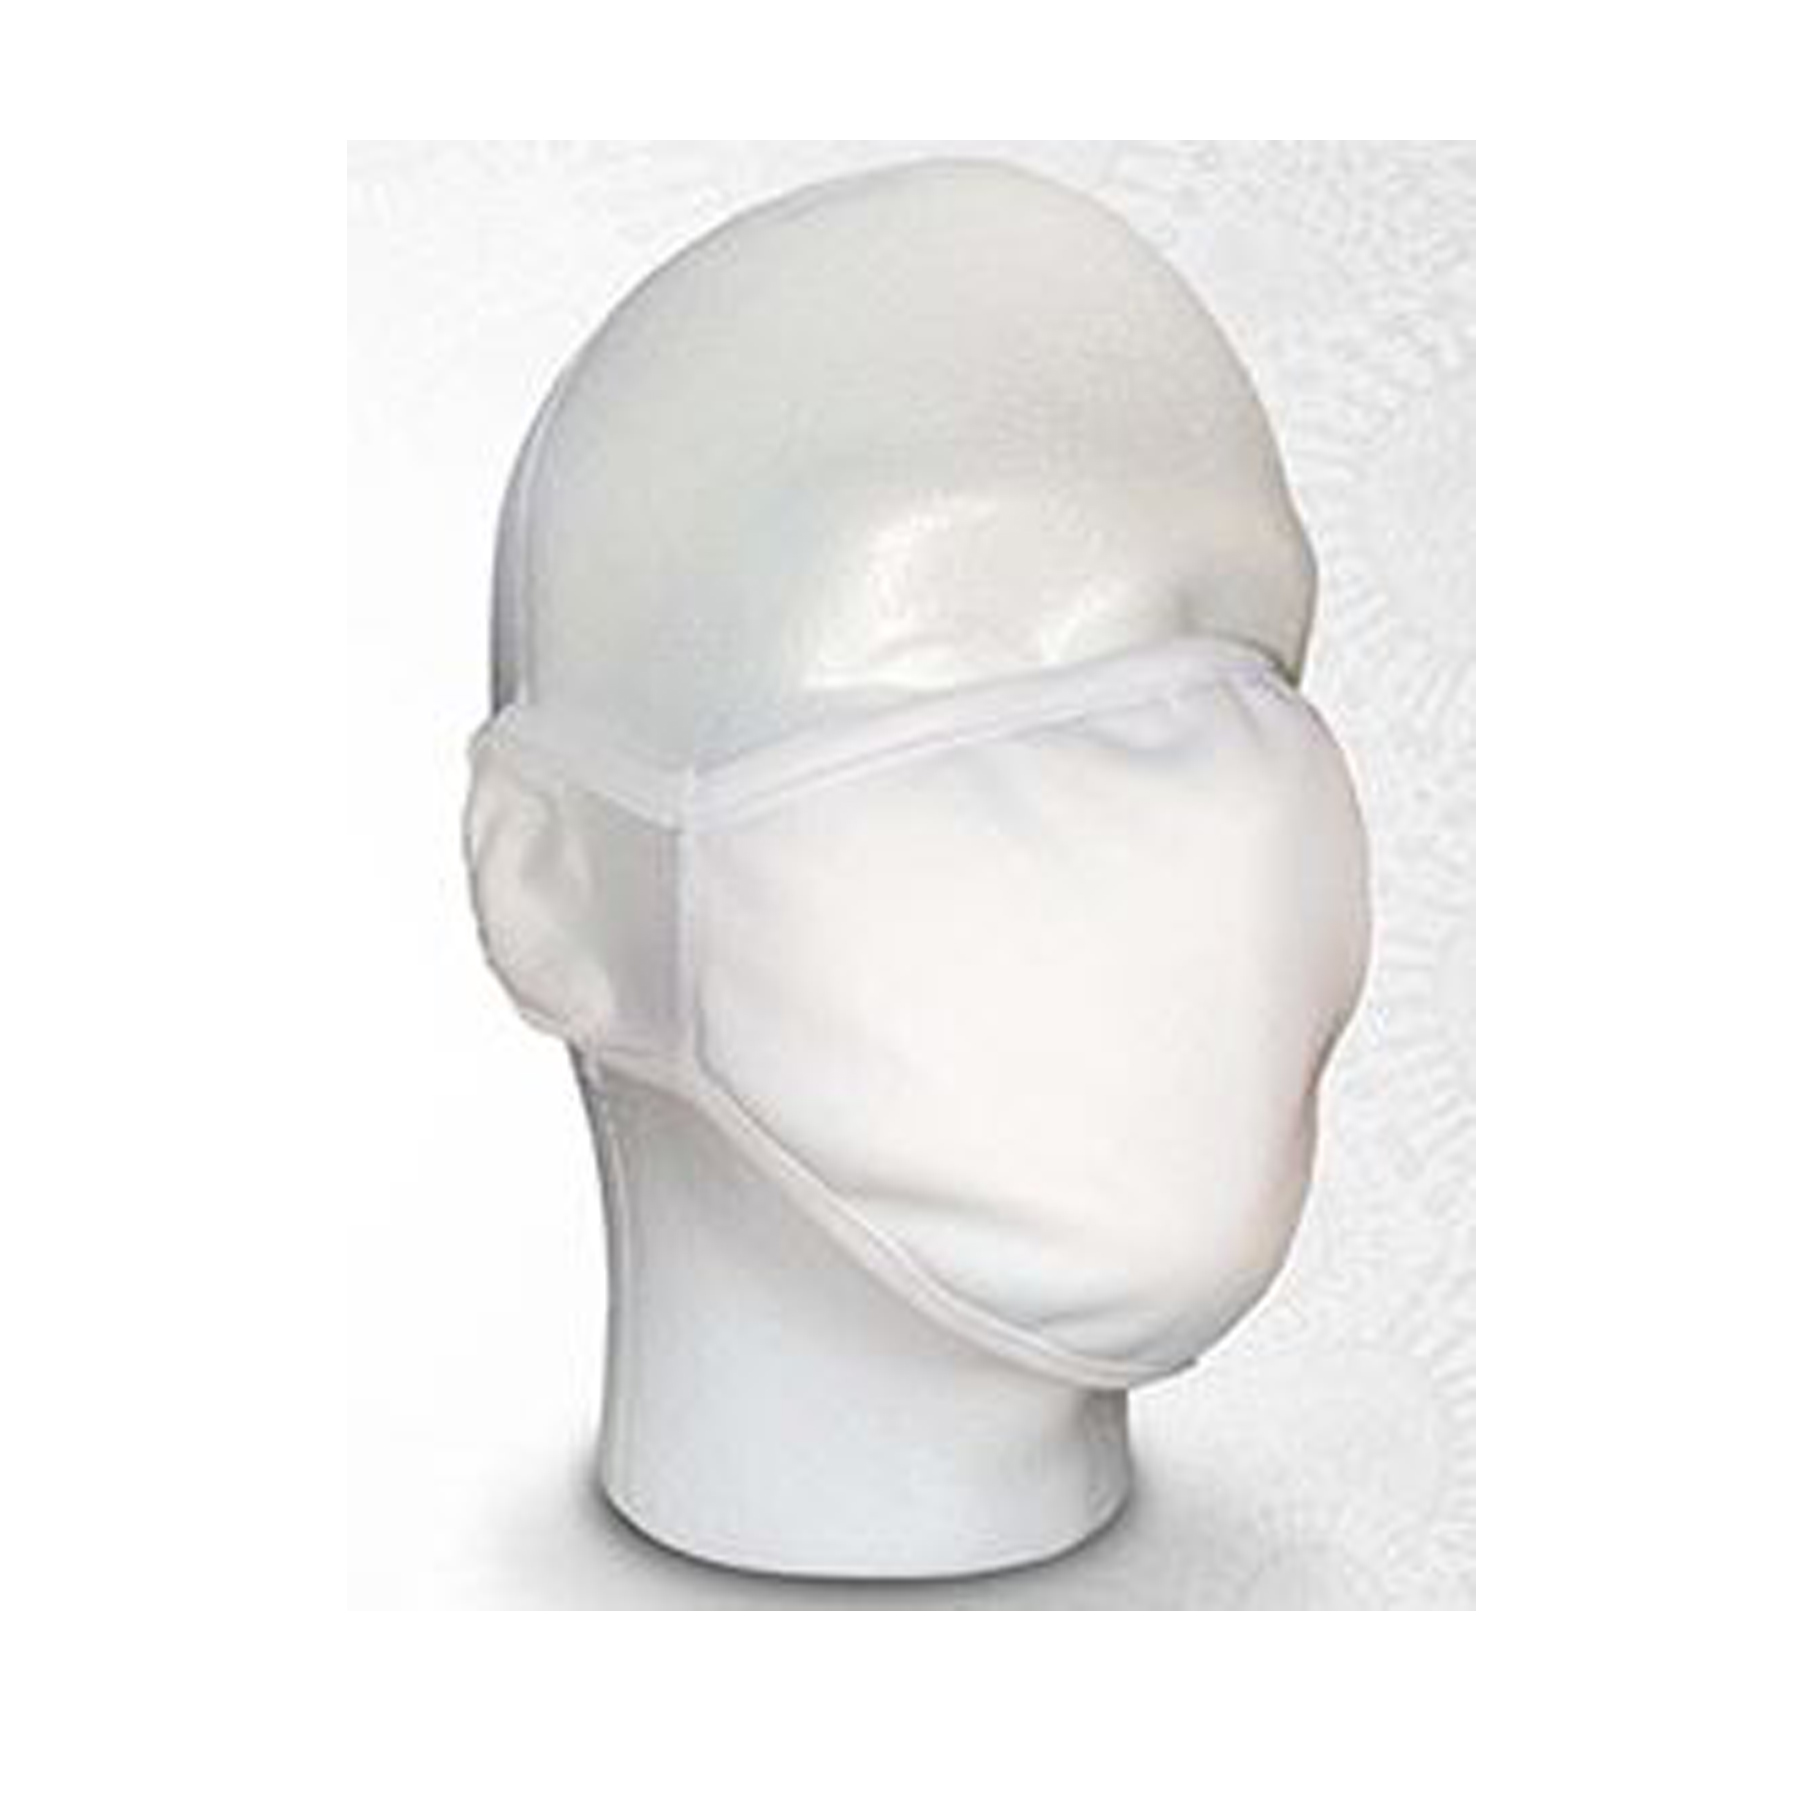 Safety Shield Protective Face Mask